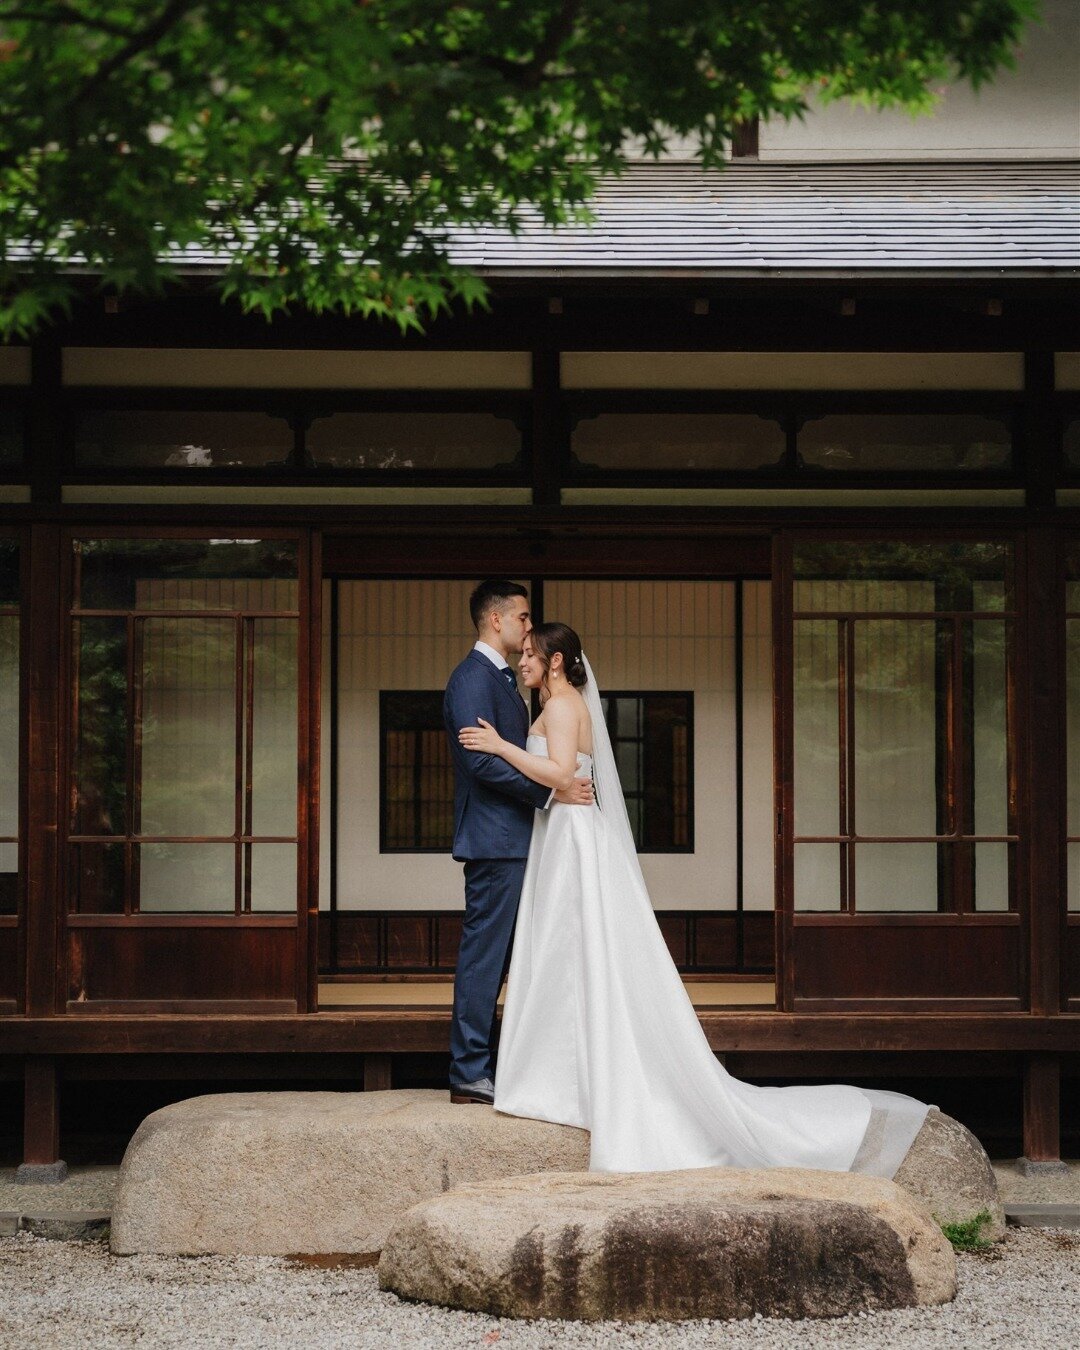 From serene gardens to vibrant city lights! ✨ - Part 1

Surrounded by the tranquil beauty of a Japanese garden, M &amp; T said &quot;I do&quot;! Their vows were exchanged amidst the serenity of nature, followed by a joyful Kagami-biraki sake barrel b